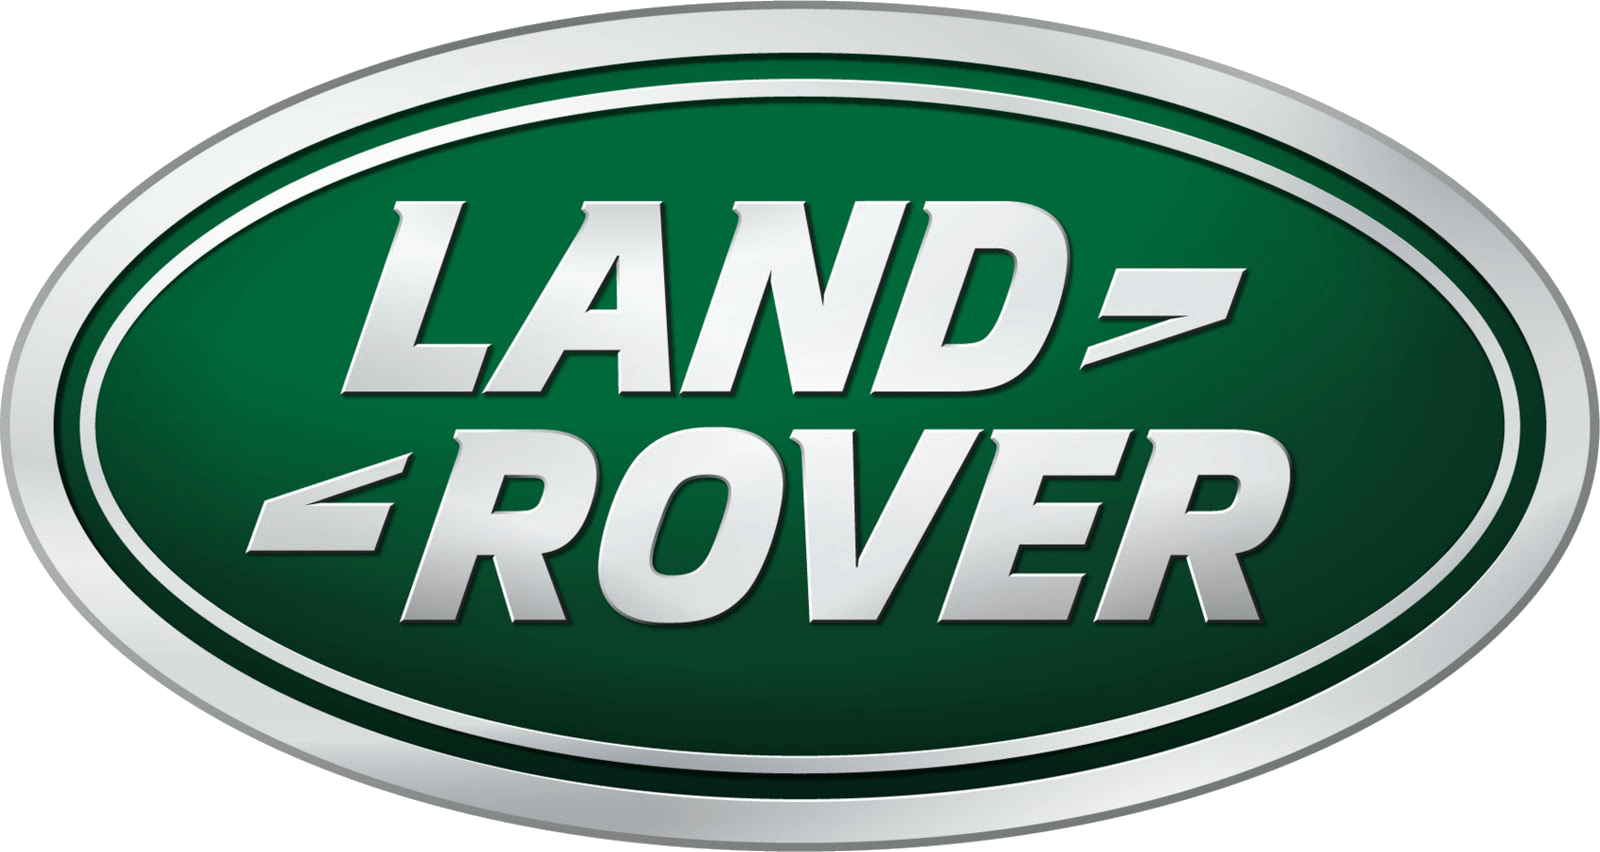 Brand with Green Circle Logo - Land Rover Logo, Land Rover Car Symbol Meaning and History | Car ...